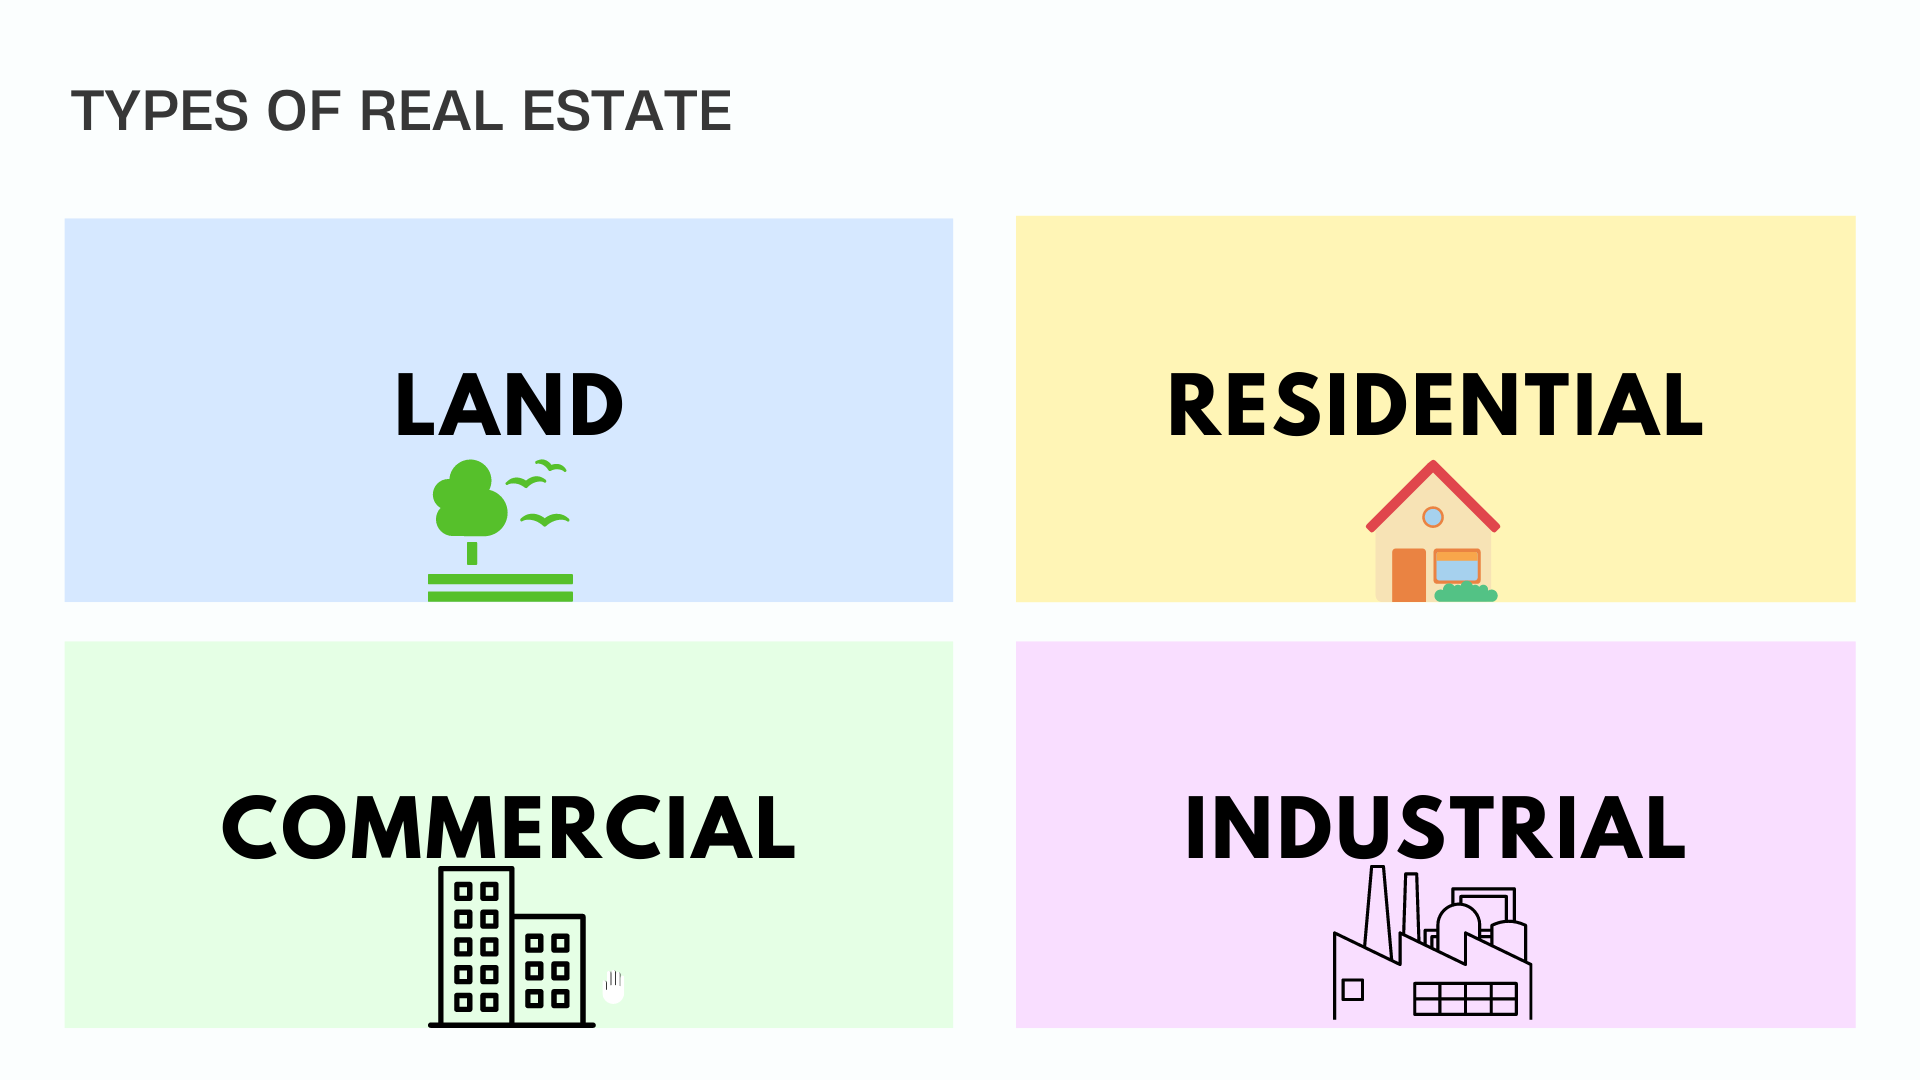 Types of real estate